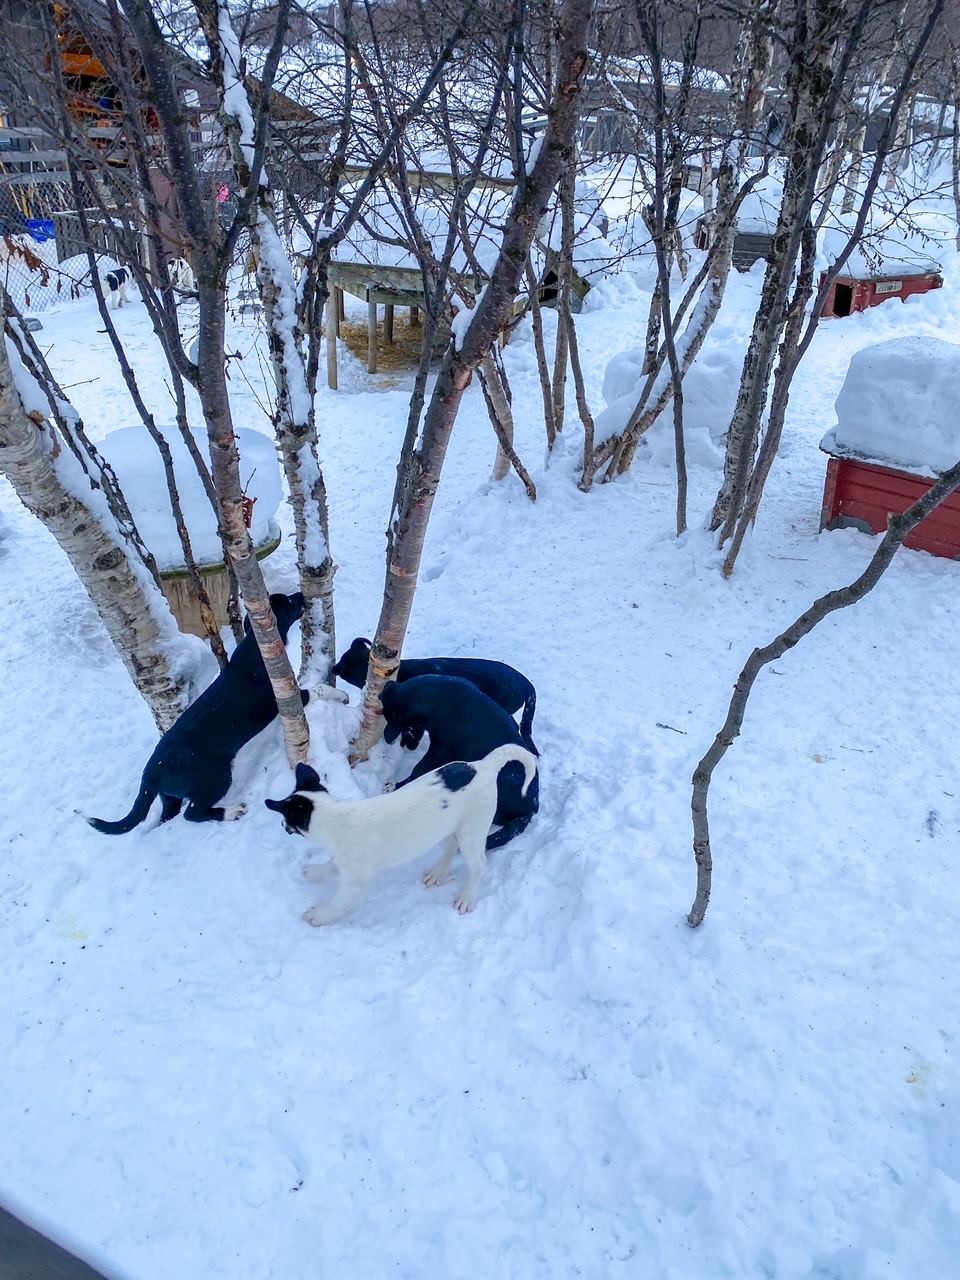 Husky puppies at the Snowhotel in Kirkenes